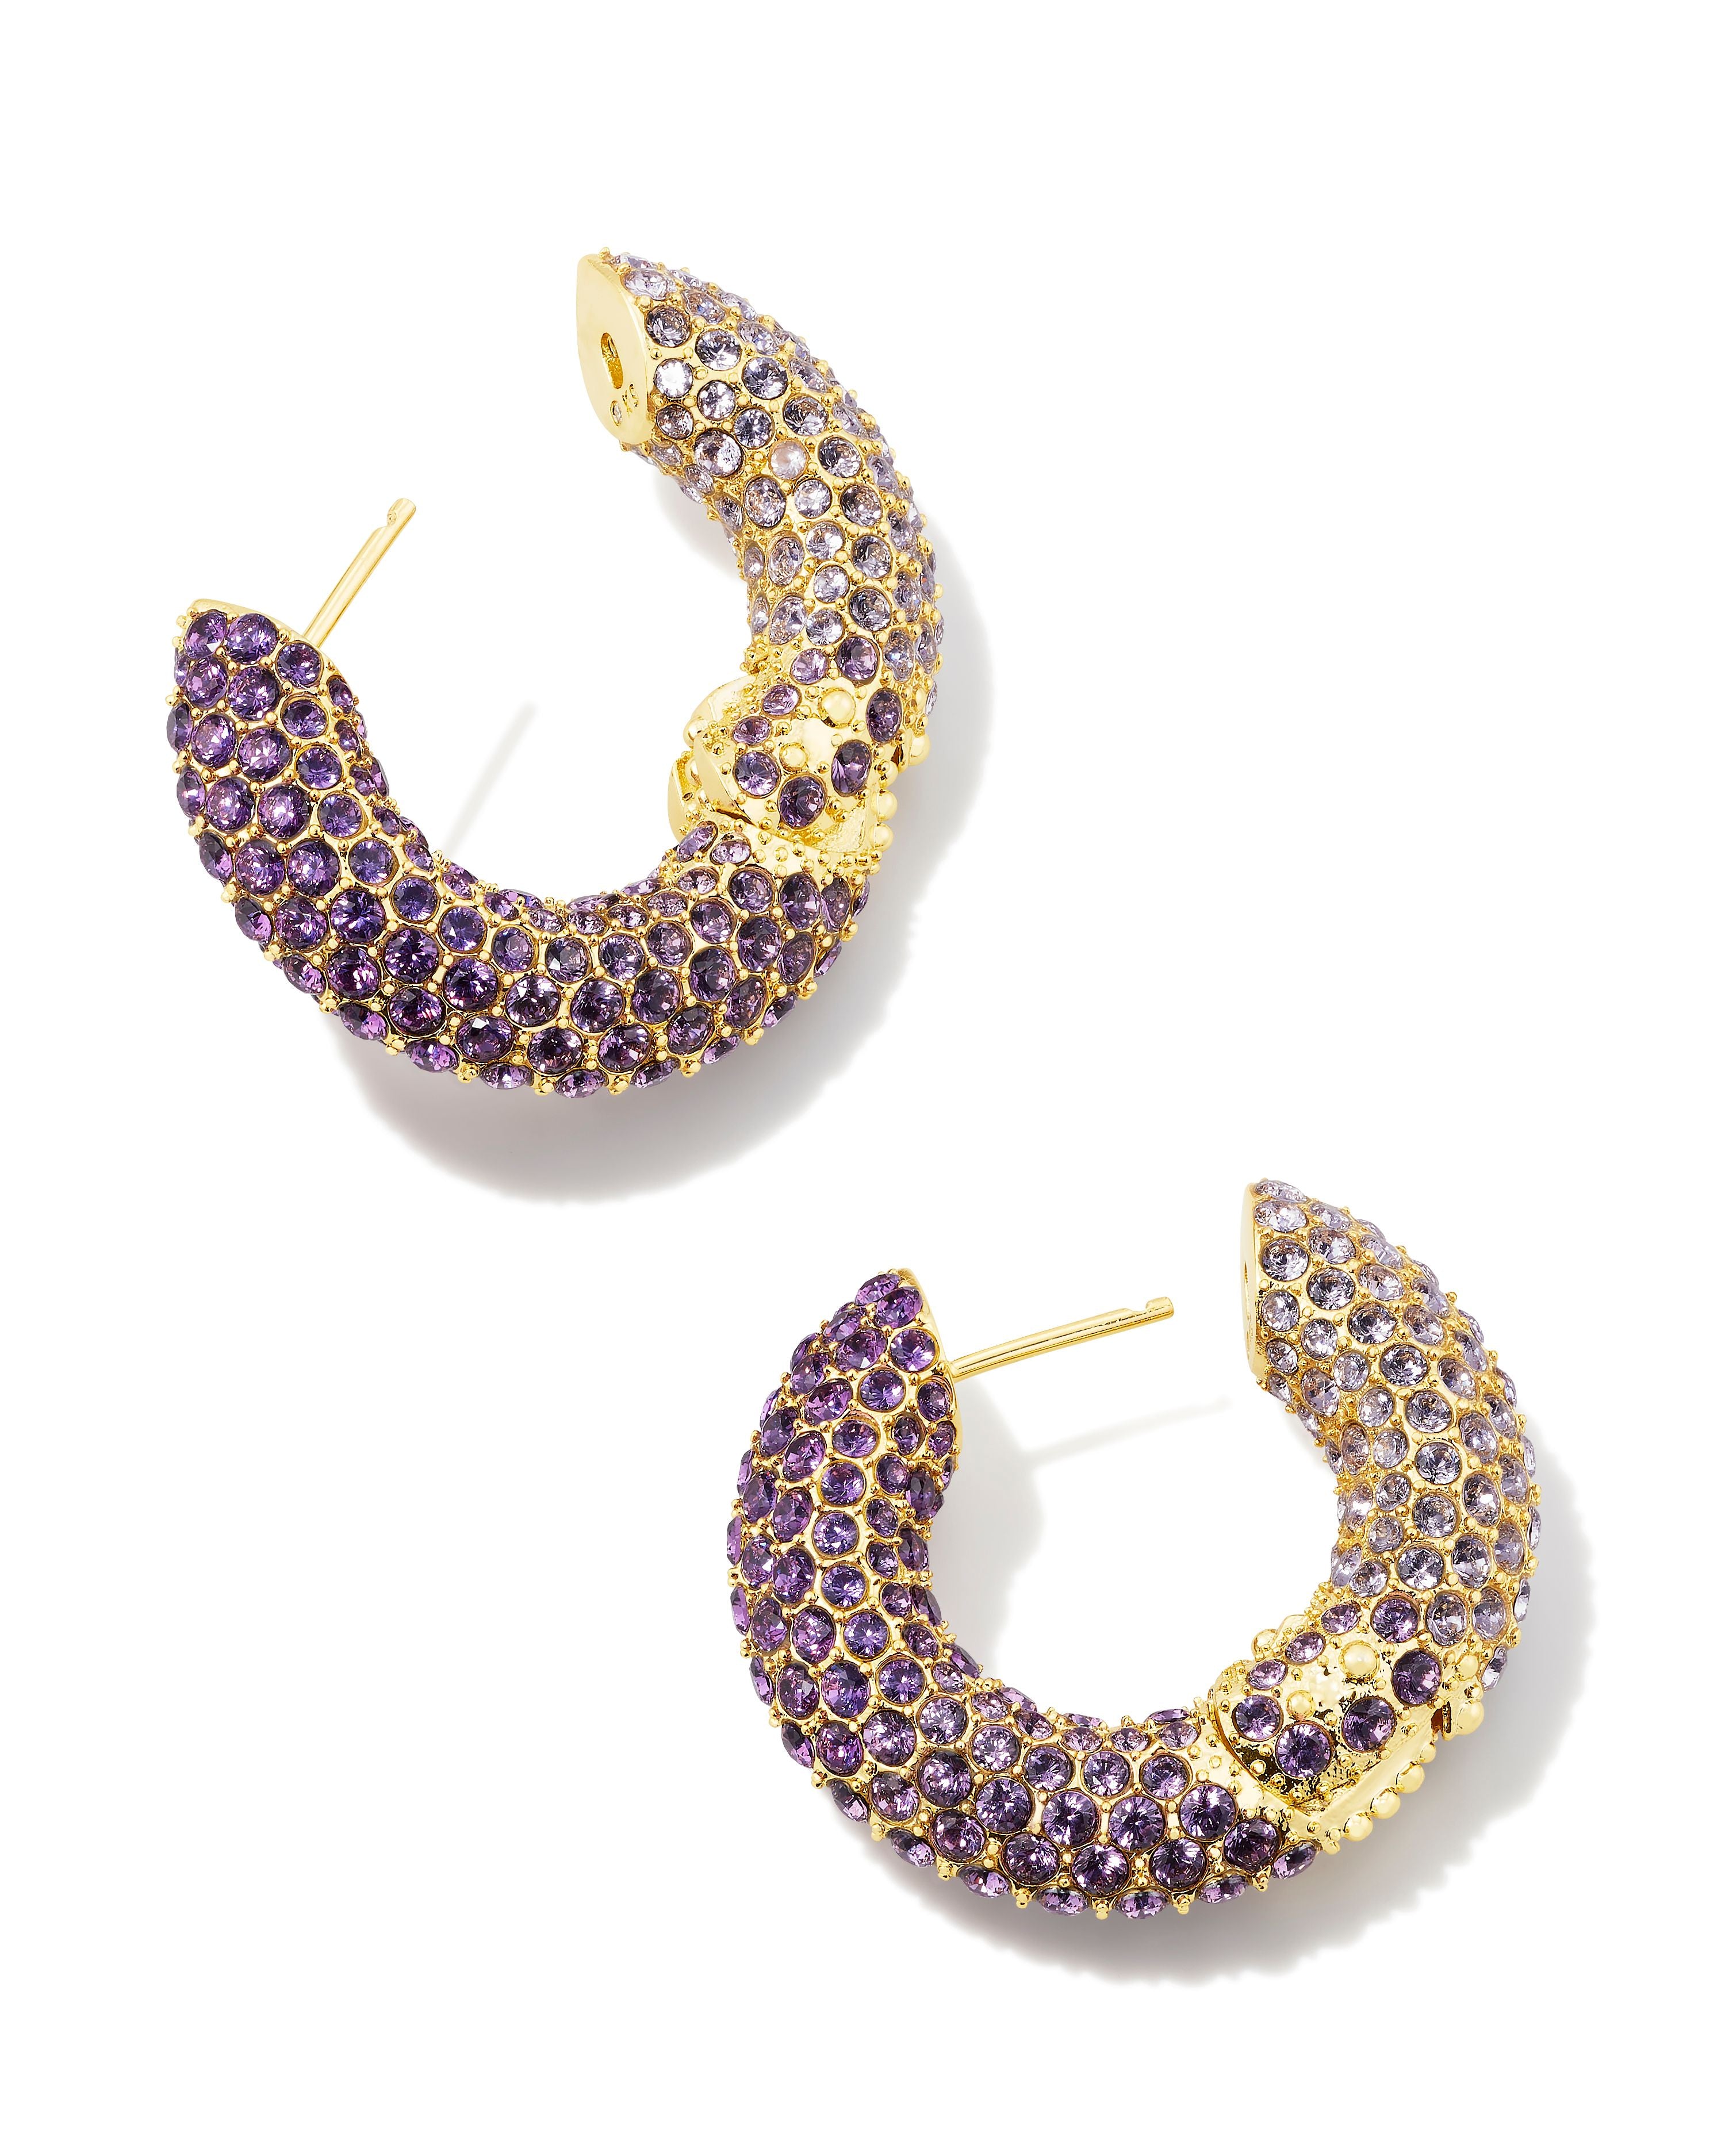 Kendra Scott Mikki Pave Hoop Earrings in Purple Mauve Ombre Mix and Gold